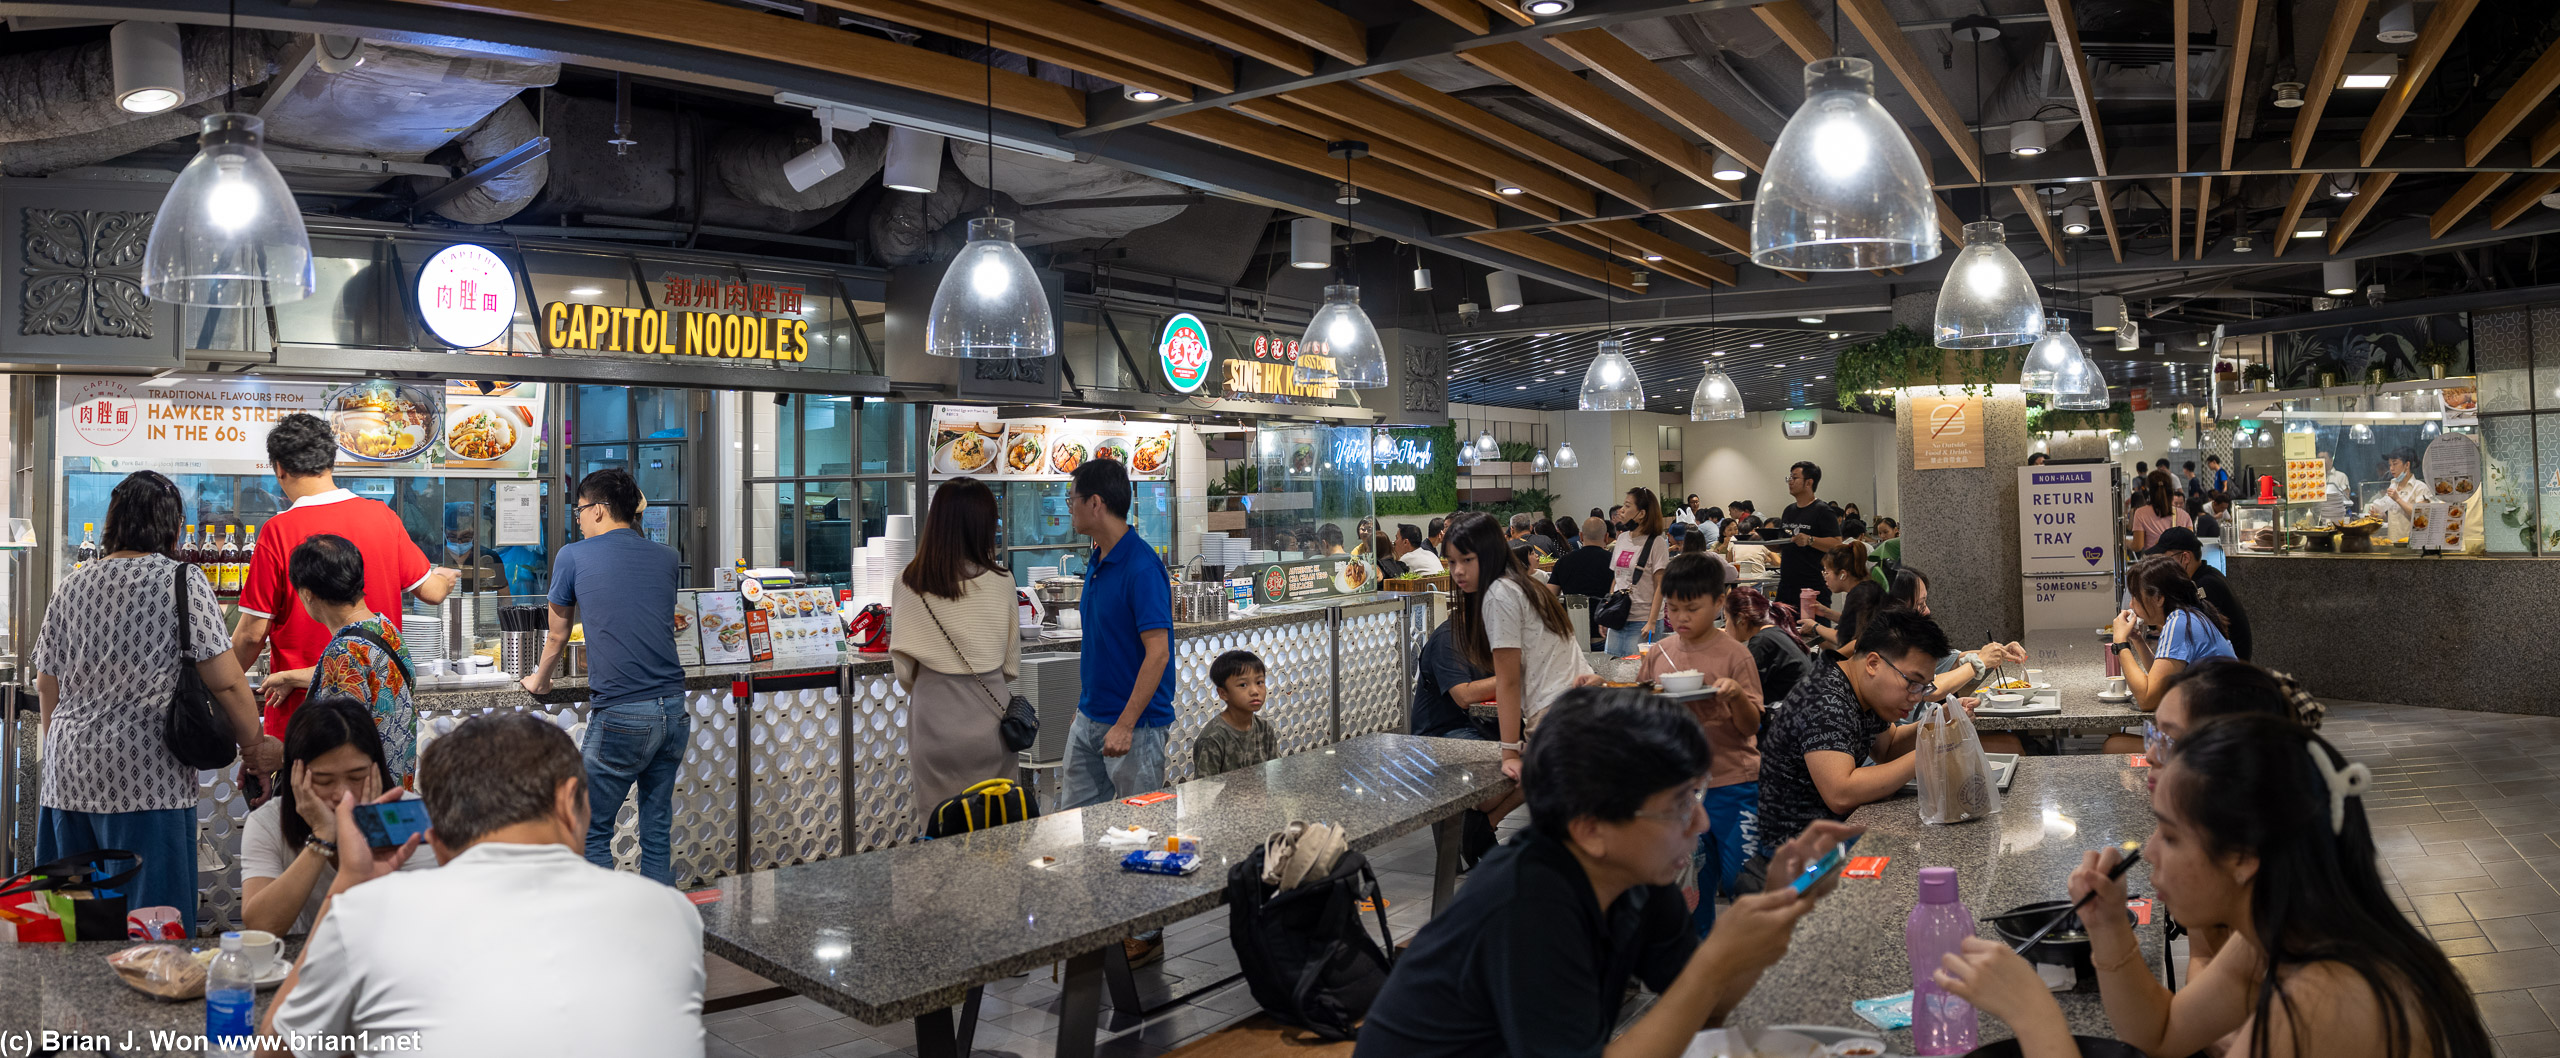 Located in the Food Republic food court at Suntec City Mall.